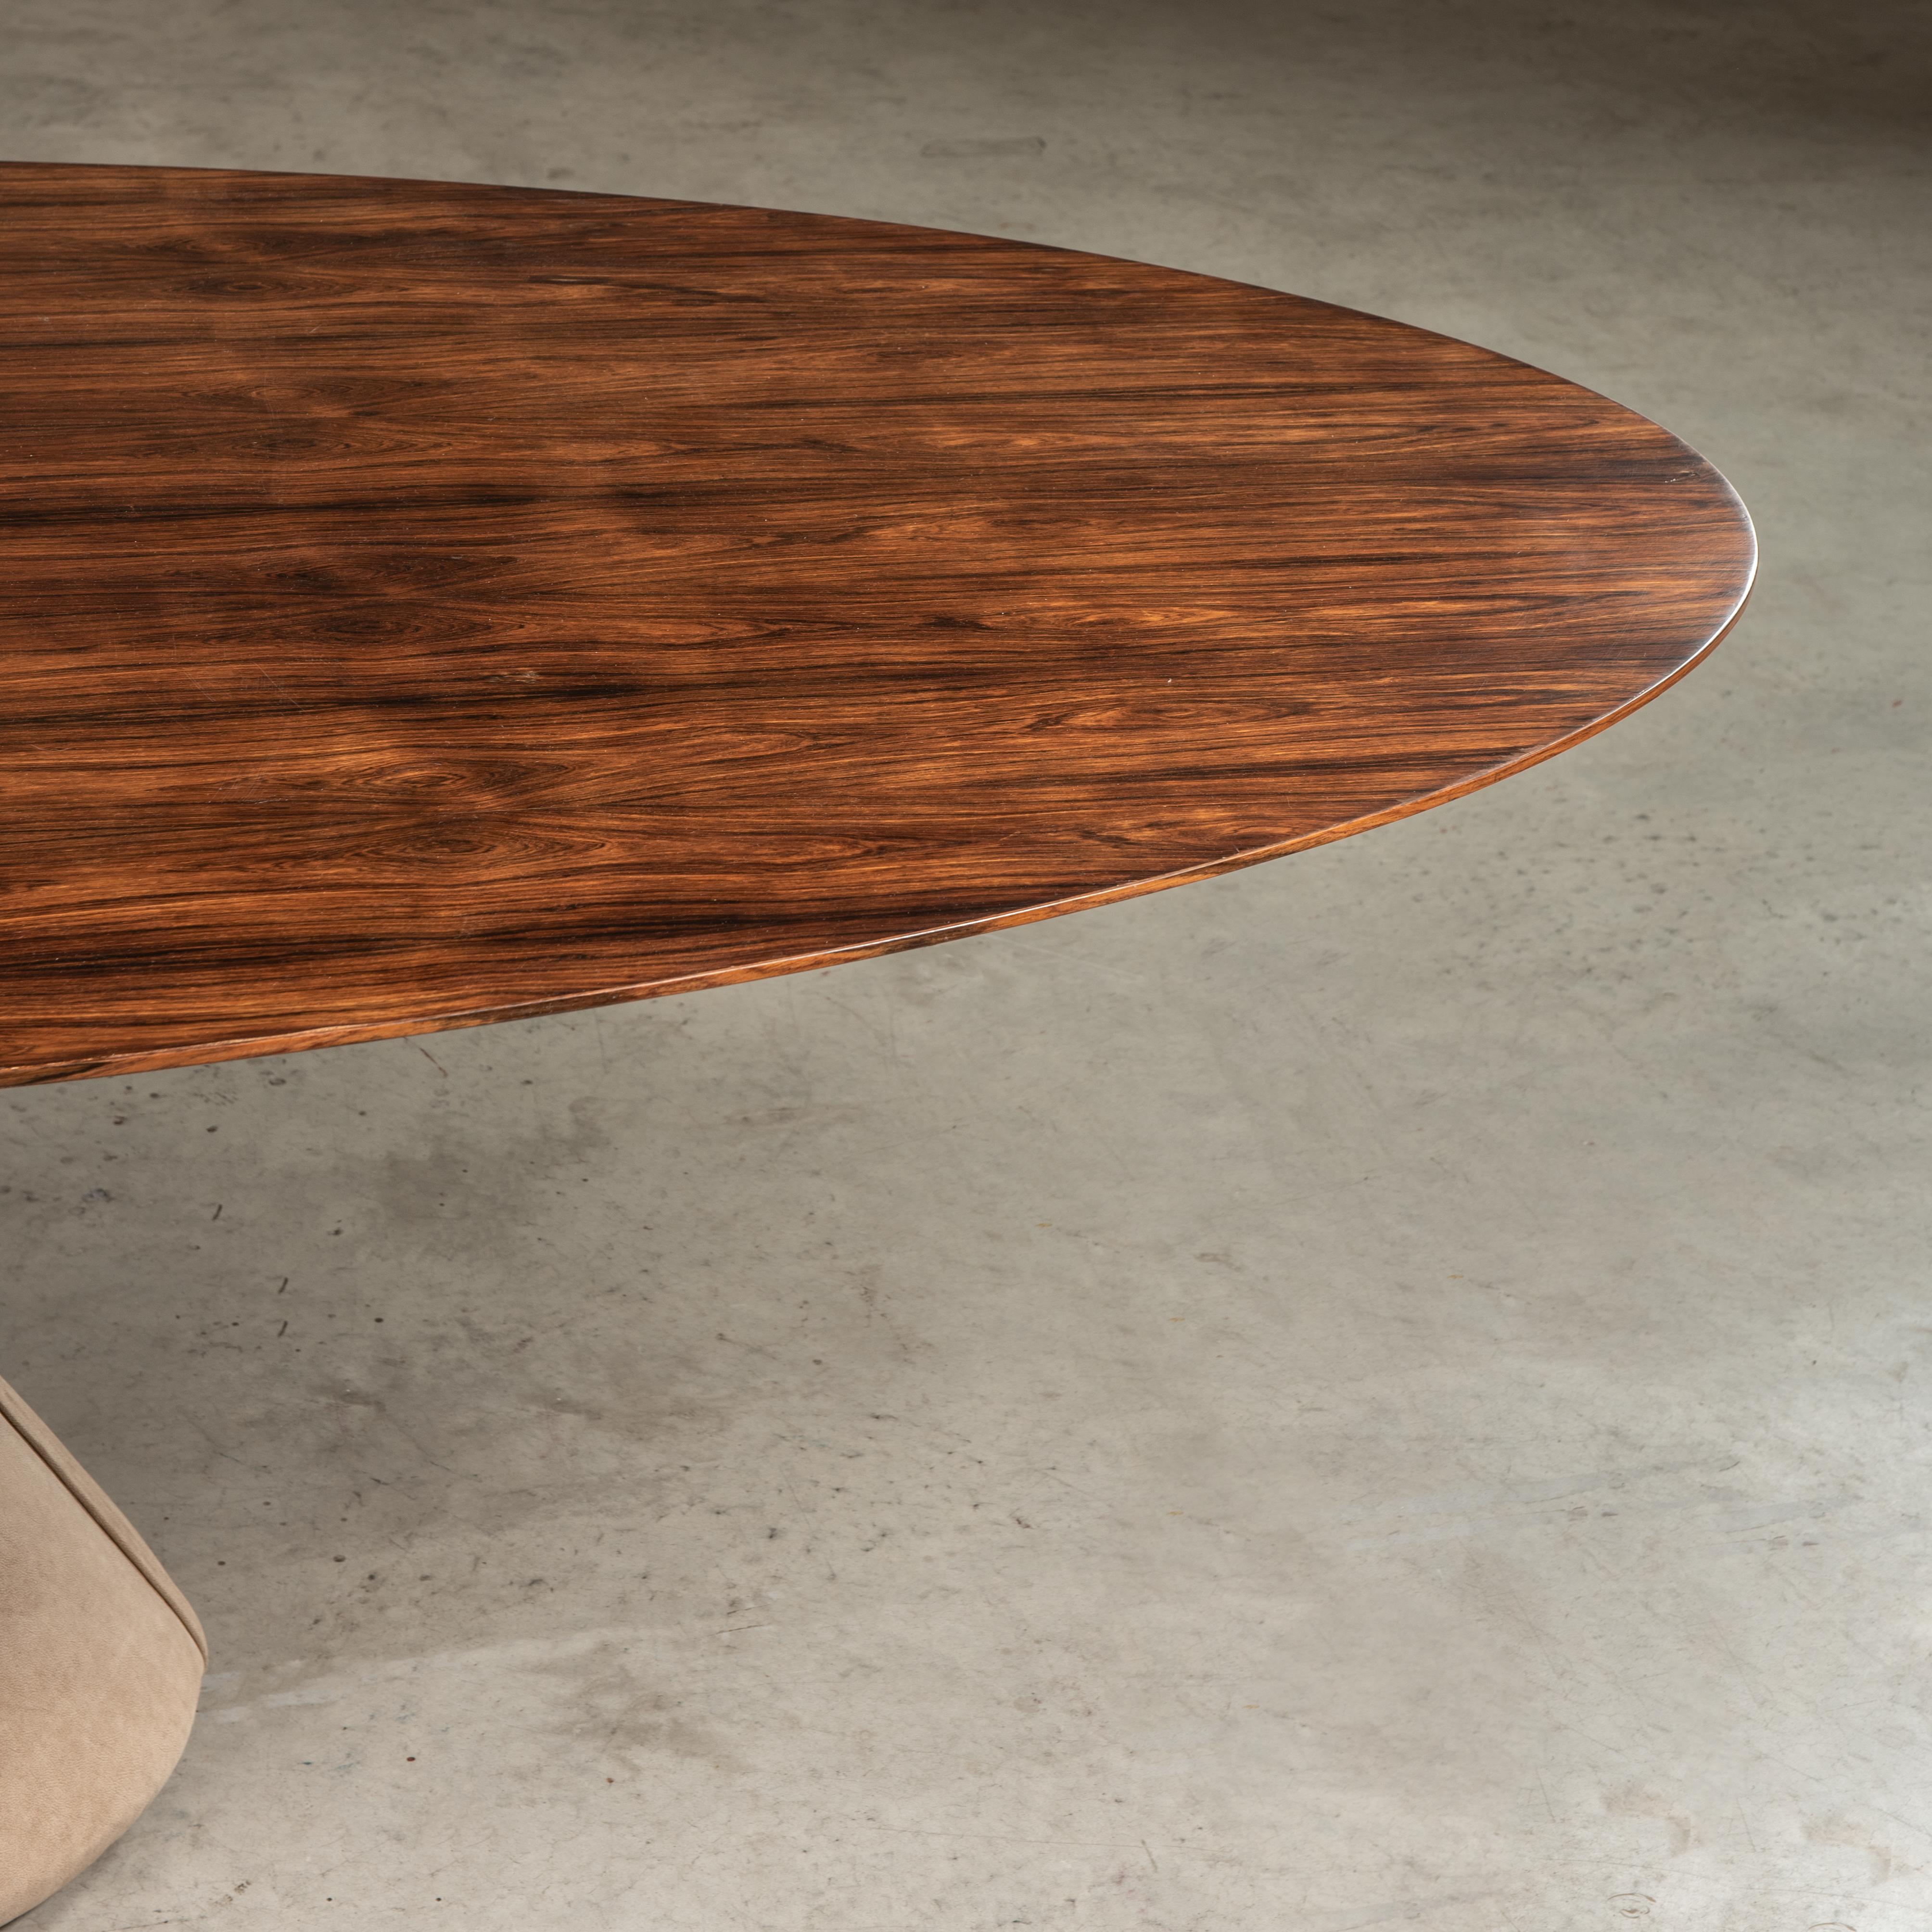 'Guanabara' Dining Table, by Jorge Zalszupin, Brazilian Mid-Century Modern In Good Condition For Sale In Sao Paulo, SP